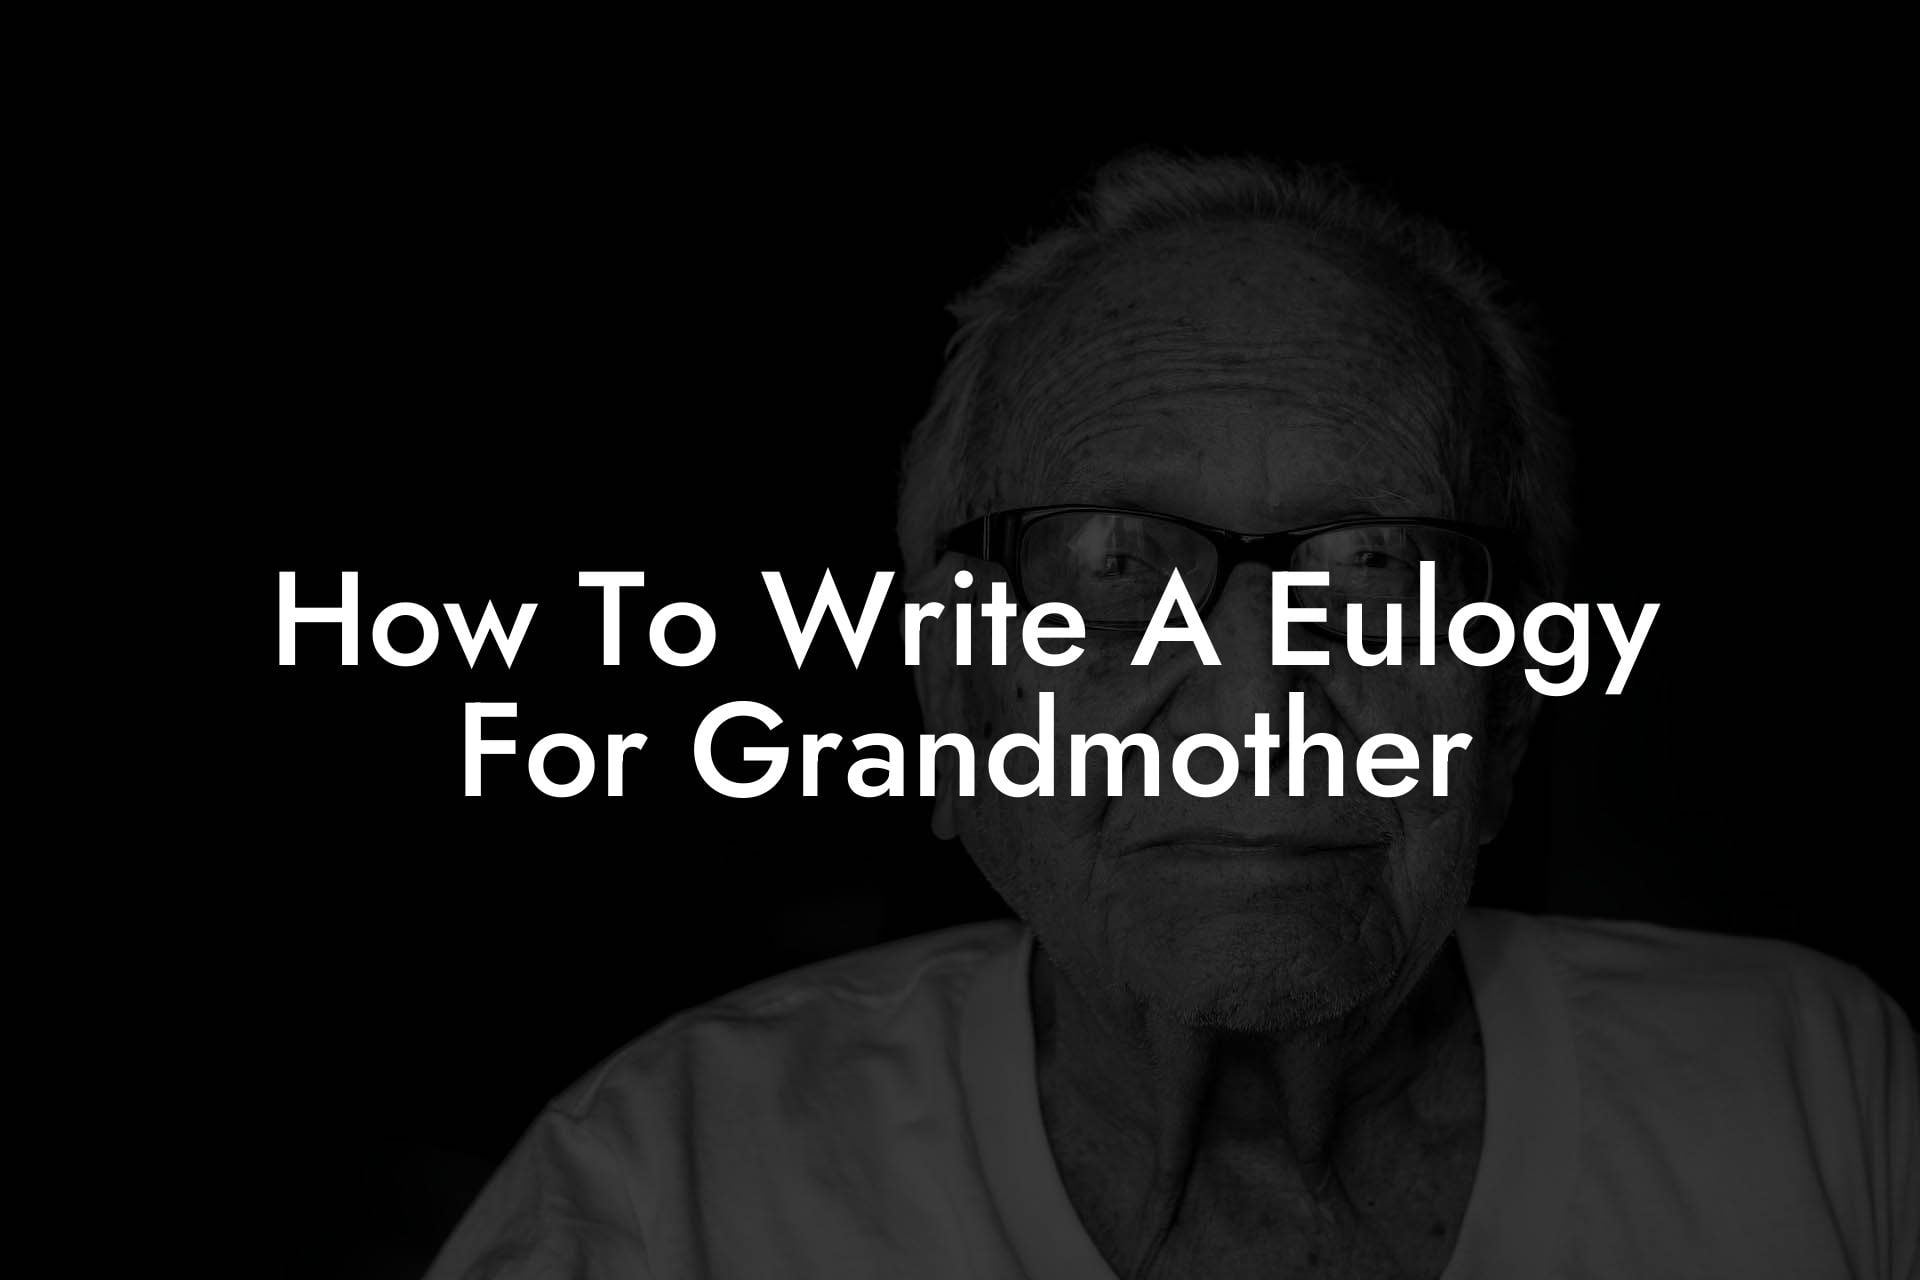 How To Write A Eulogy For Grandmother